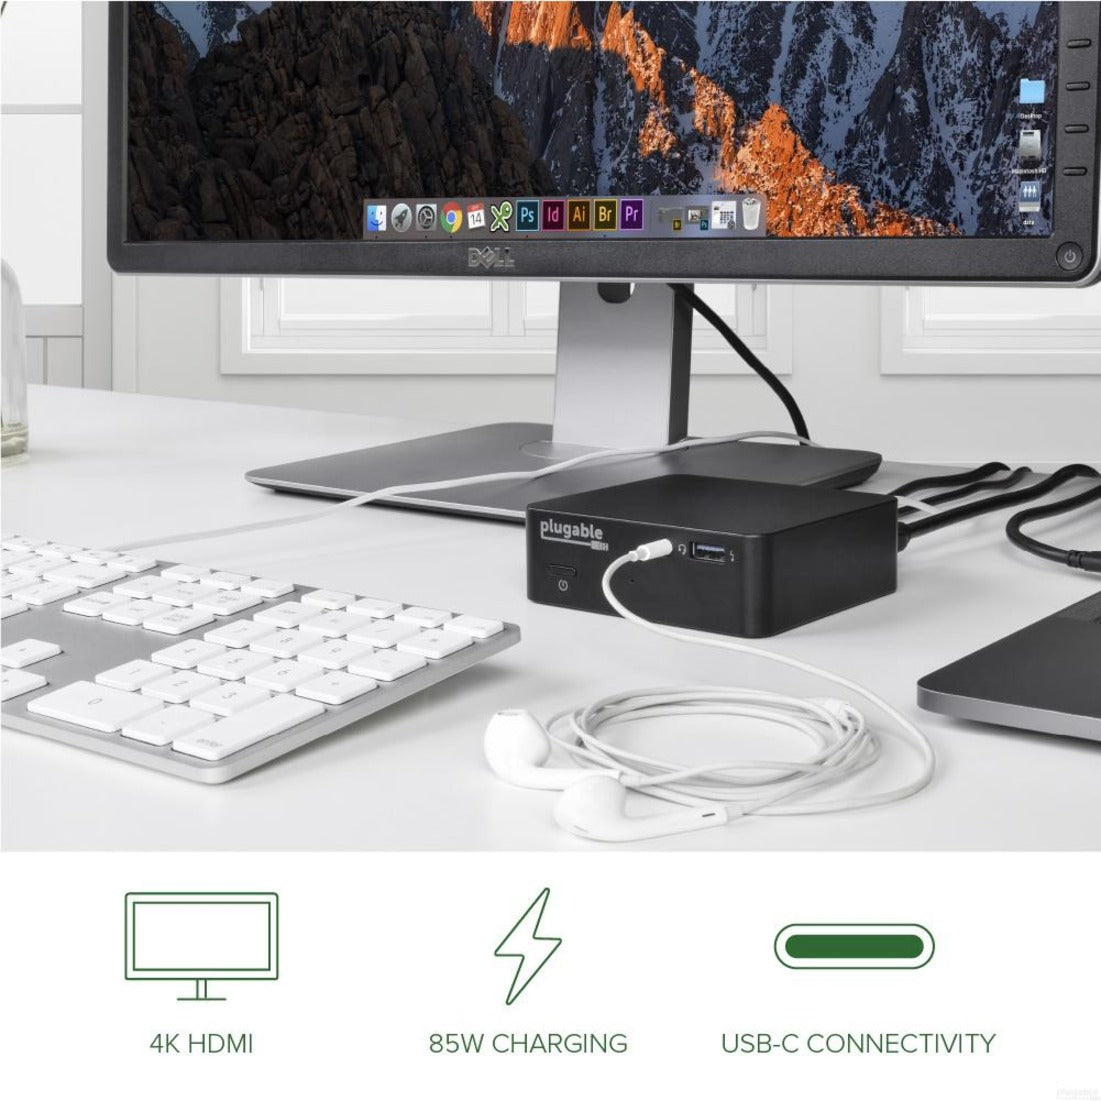 Plugable UD-CAM USB-C Dock with 85W Charging, Thunderbolt 3 and USB-C Compatibility